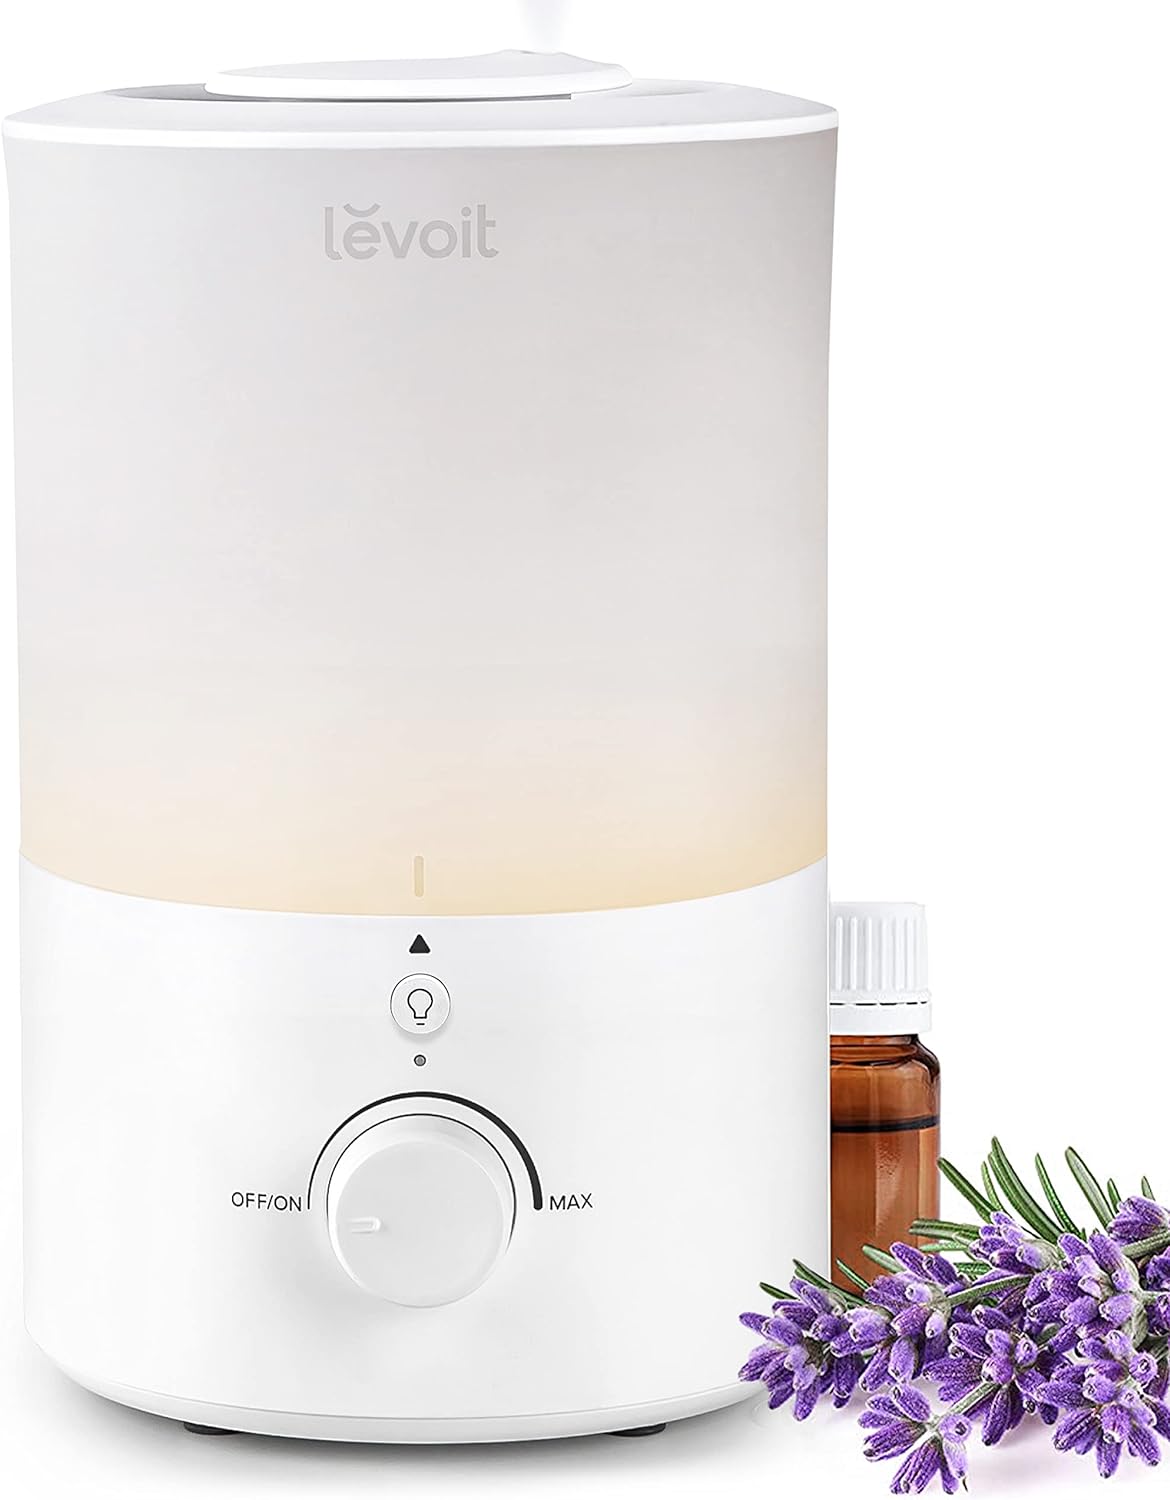 LEVOIT Humidifiers for Bedroom with Night Light(3L Water Tank)Cool Mist Top Fill Essential Oil Diffuser for Baby Nursery and Plants, 360 Nozzle, Quiet, Rapid Humidification for Home Large Room, White